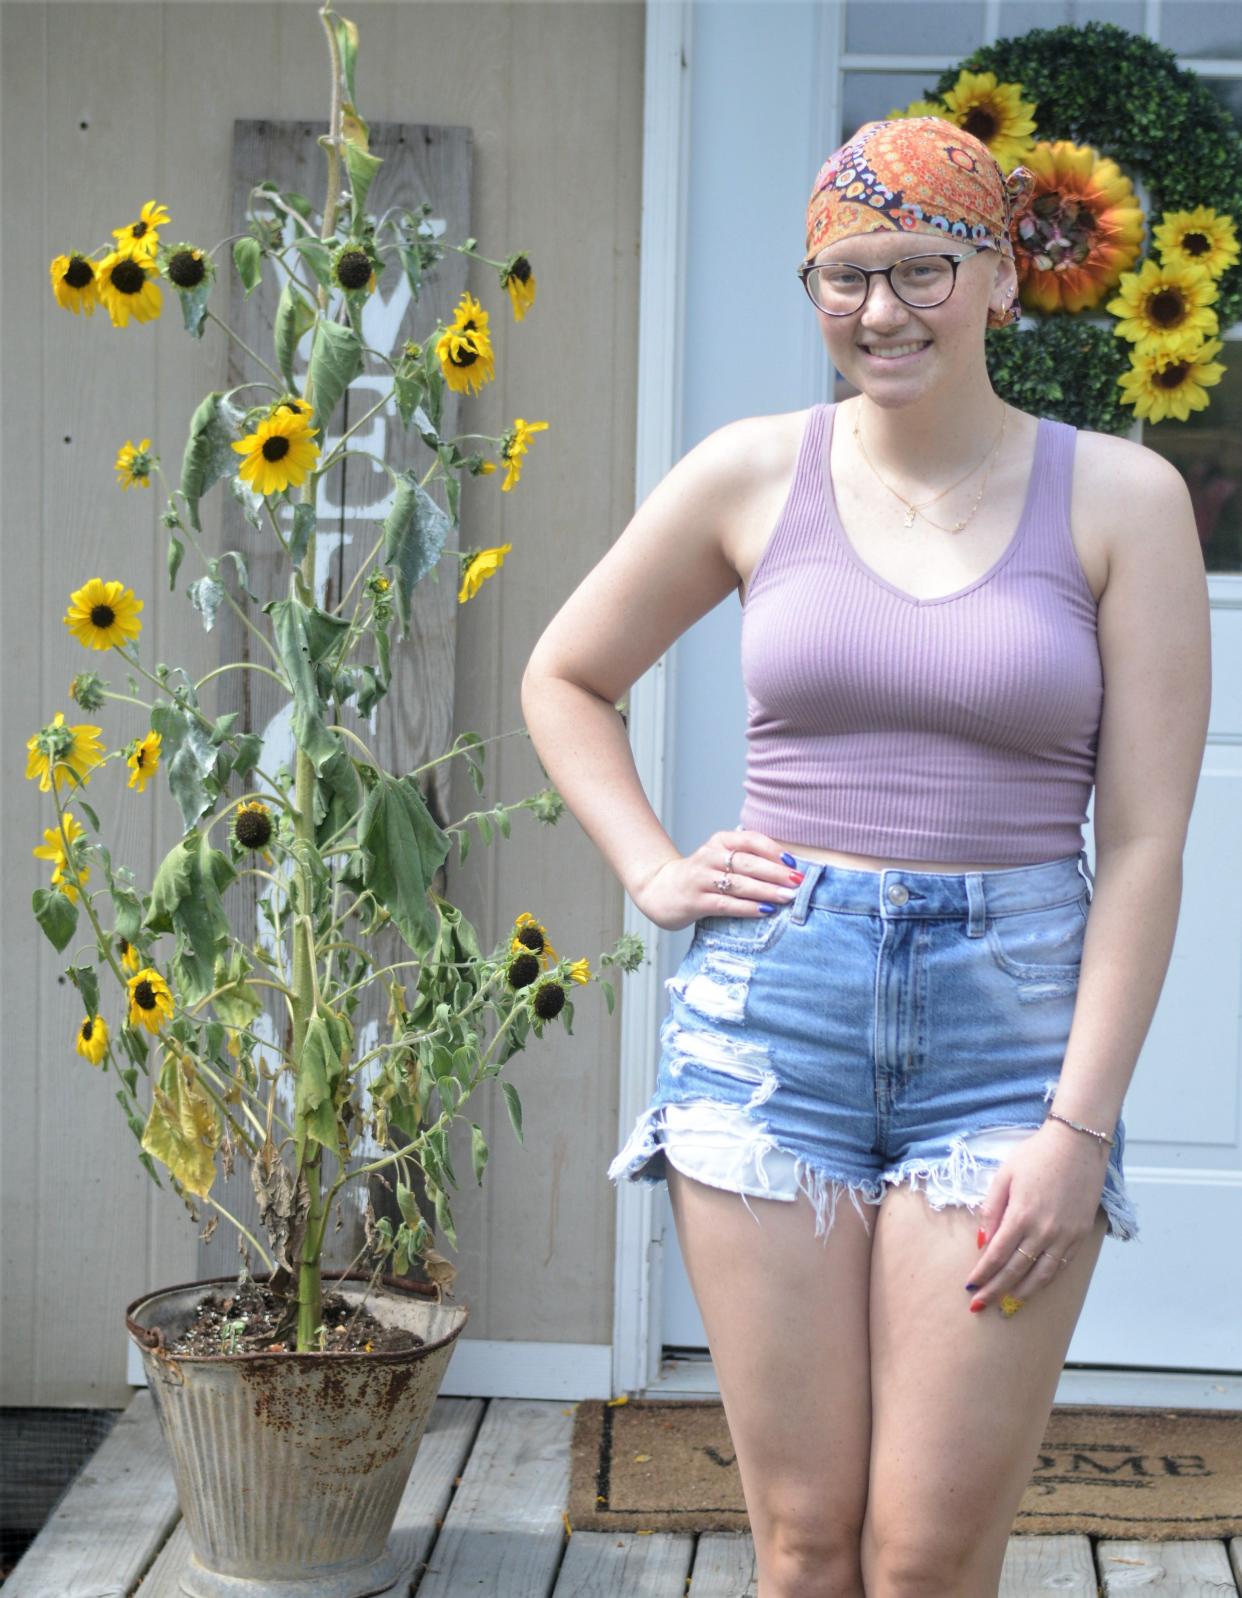 Allie Berry, a Rosecrans graduate, is currently fighting an aggressive form of cancer, Rhabdomyosarcoma. Berry, who is 19, found out about the cancer in April and appreciates the support she is receiving, while going through chemotherapy.